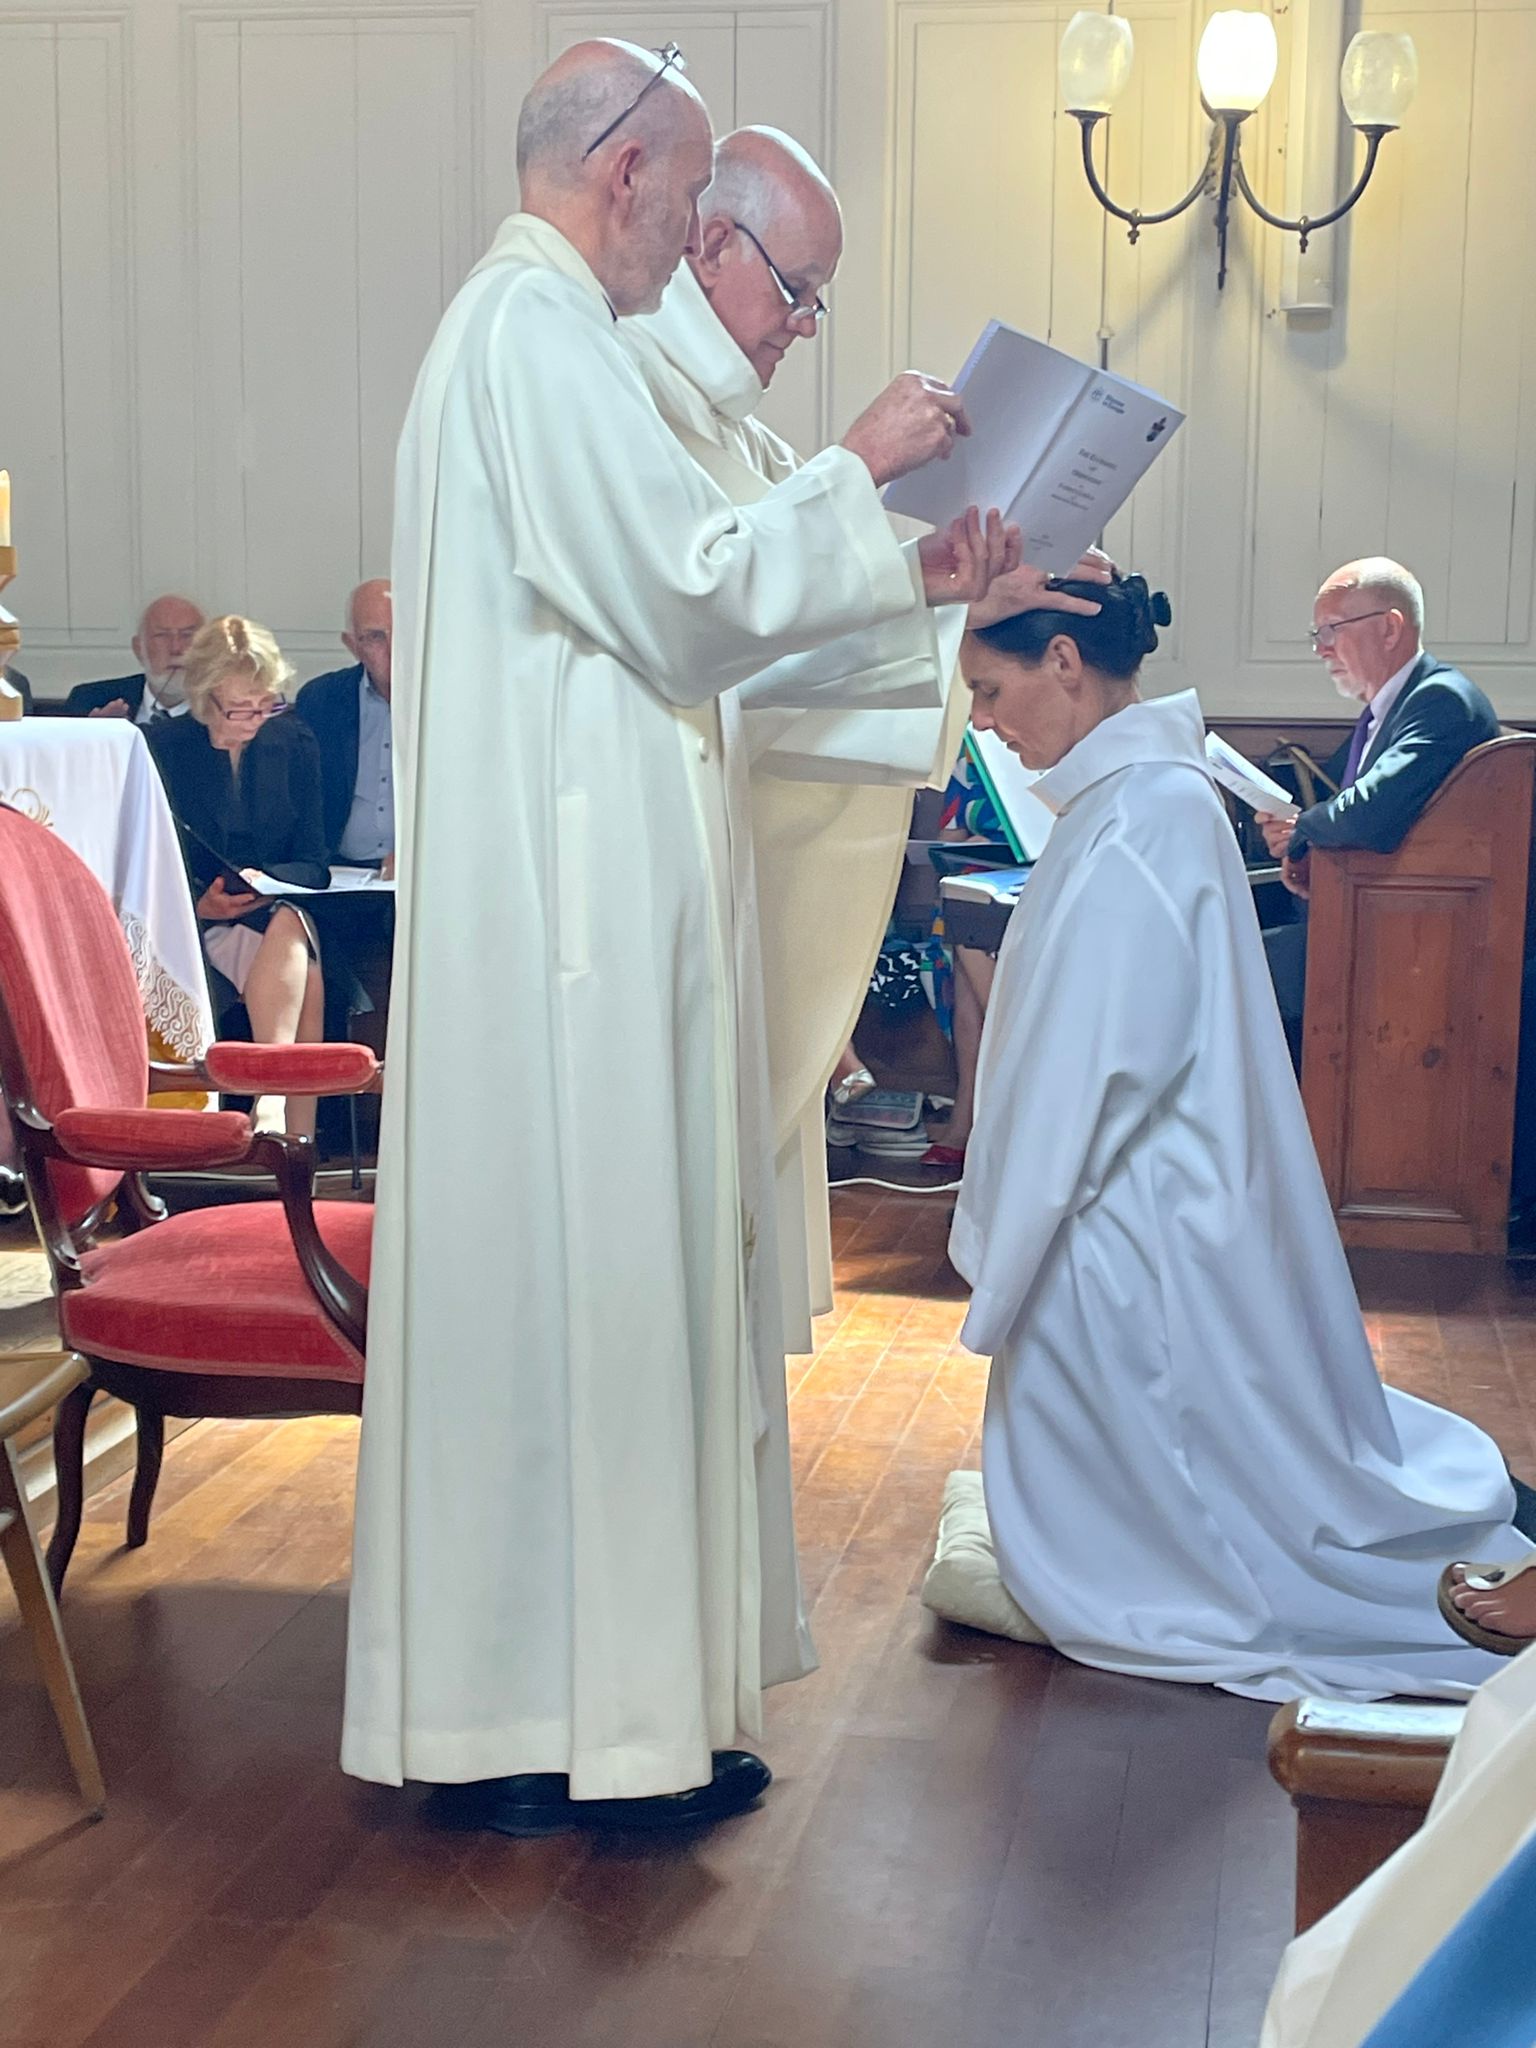 Florence Lorrain being ordained